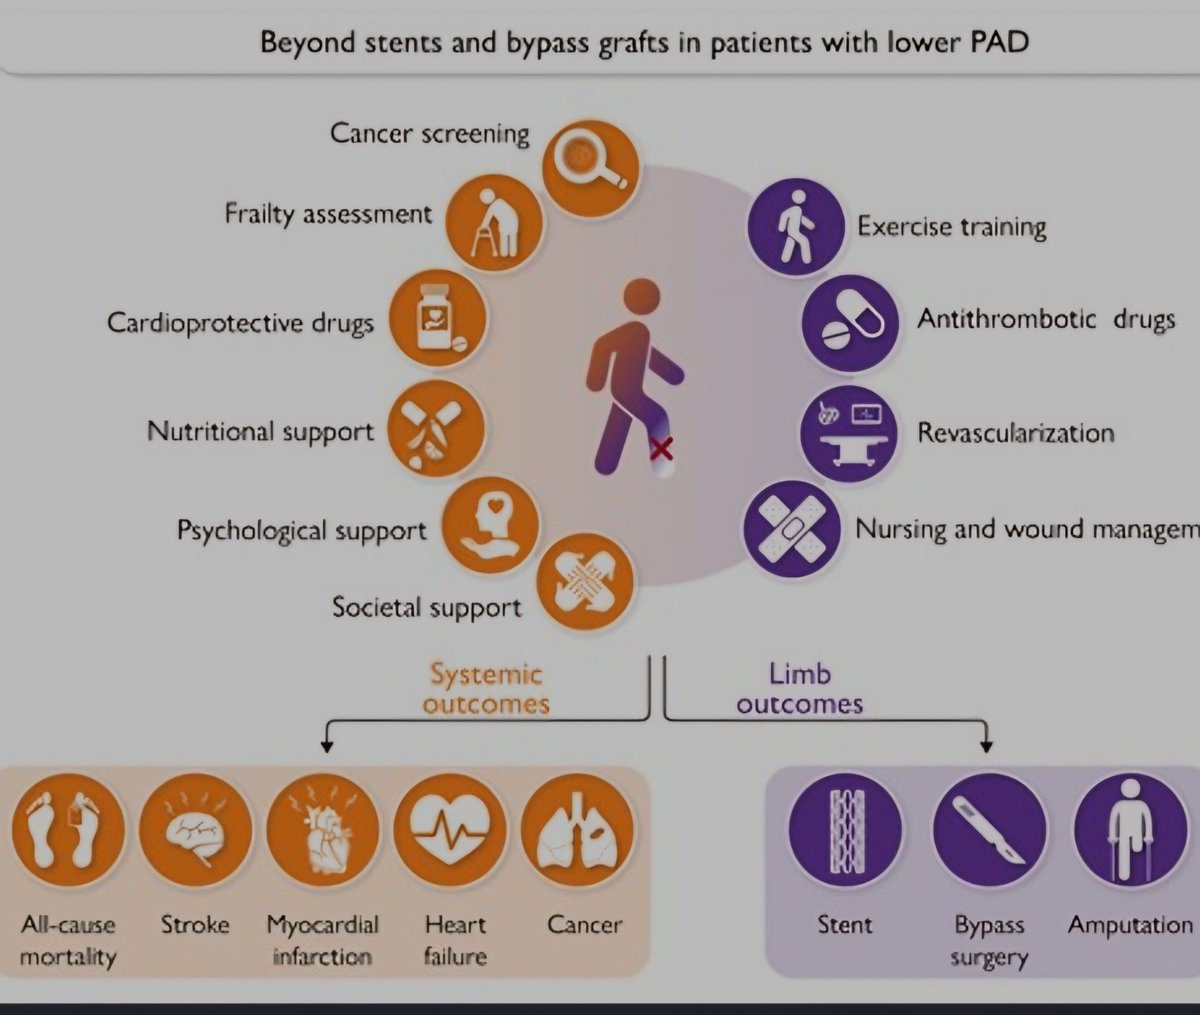 Taking care of patients with #PAD: beyond stents and grafts. A call for a holistic management of these patients. See our editorial with @Marcodecarlo72 published on line today in EHJ. @ESC_Journals @EAPCvzw